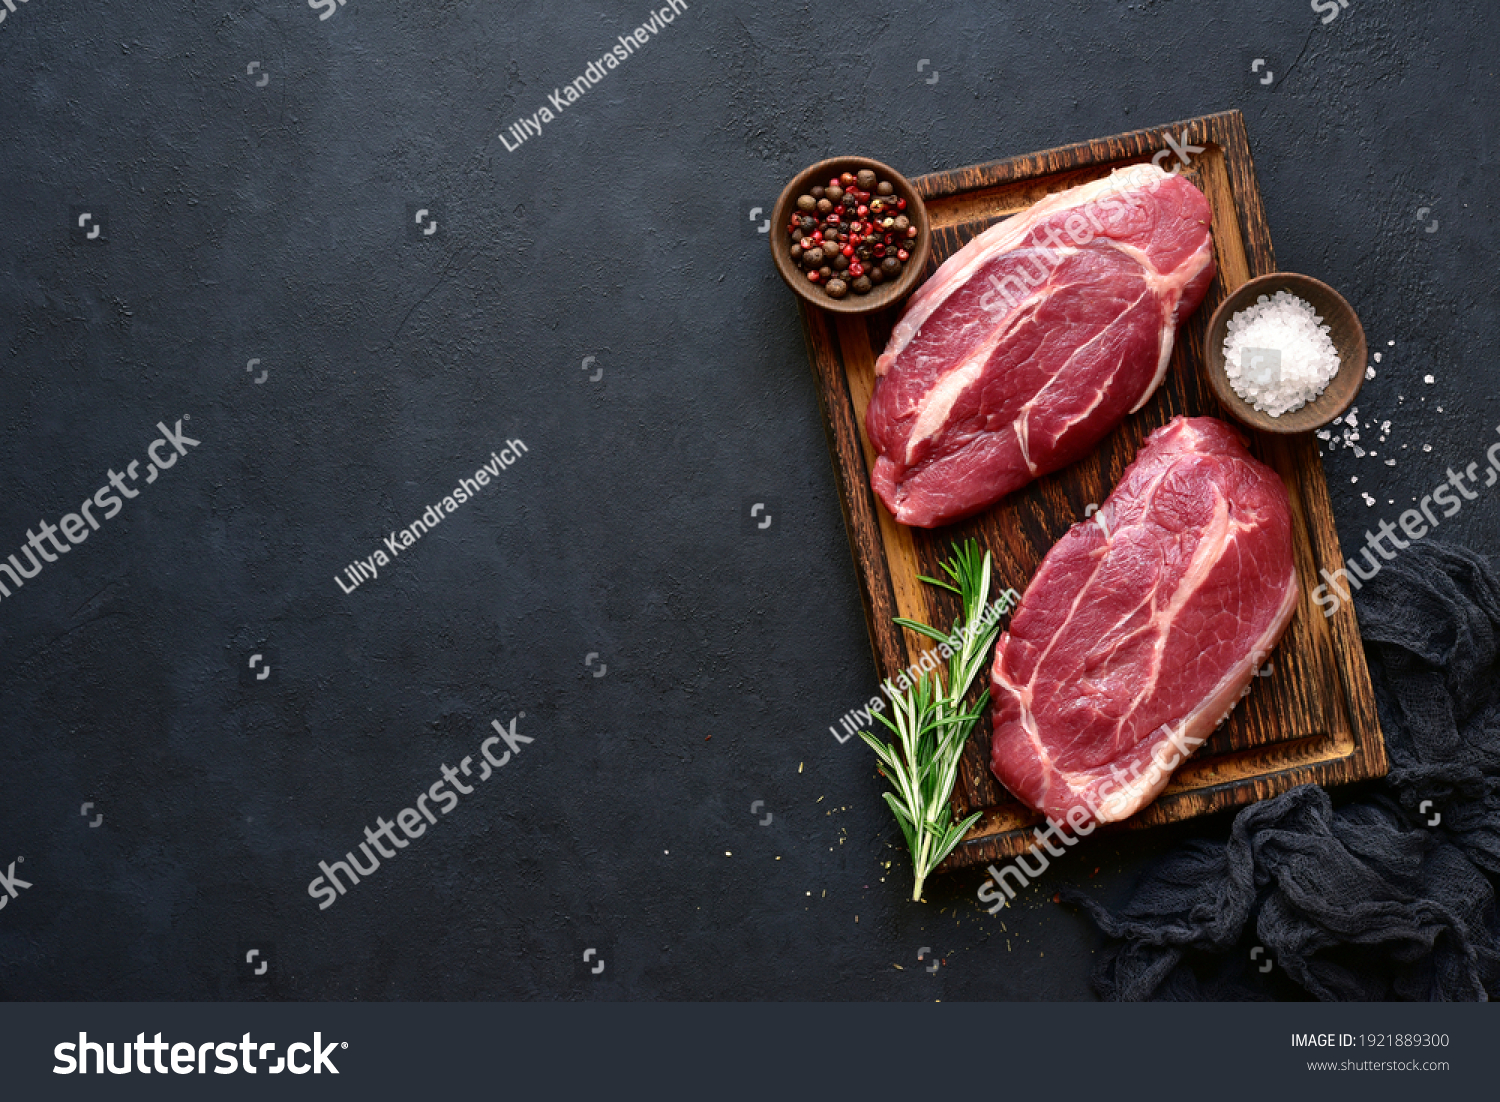 Raw organic marbled beef steaks with spices  on a wooden cutting board on a  black slate, stone or concrete background. Top view with copy space. #1921889300